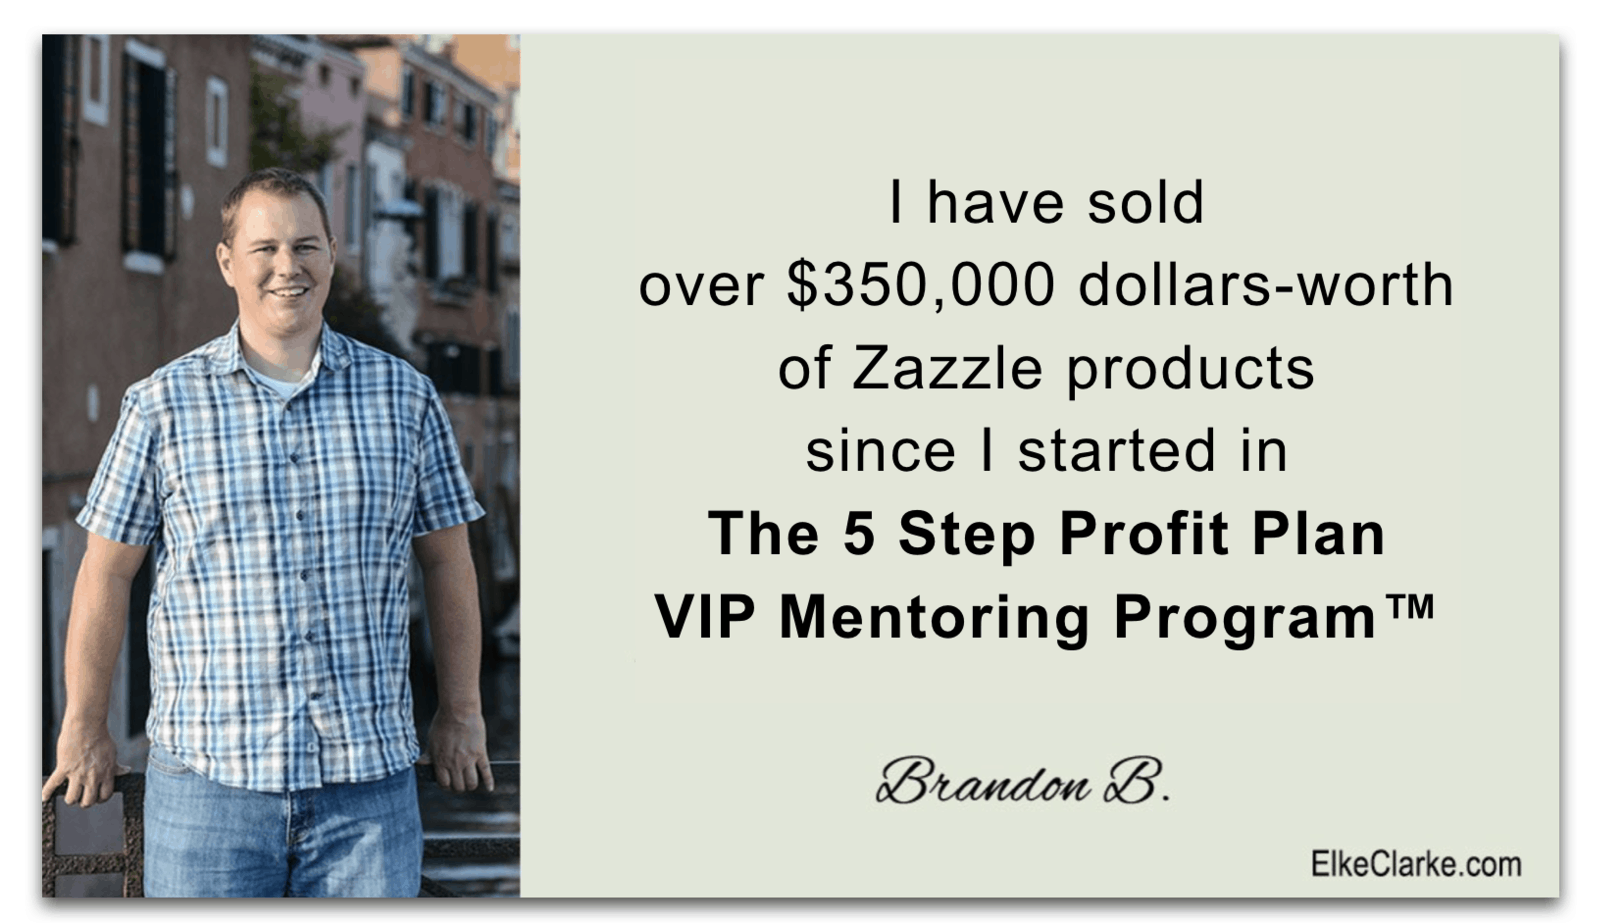 Brandon sold $350,000 US dollars-worth of Zazzle products since staring The 5 Step Profit Plan VIP Mentoring Program™ with Elke Clarke.